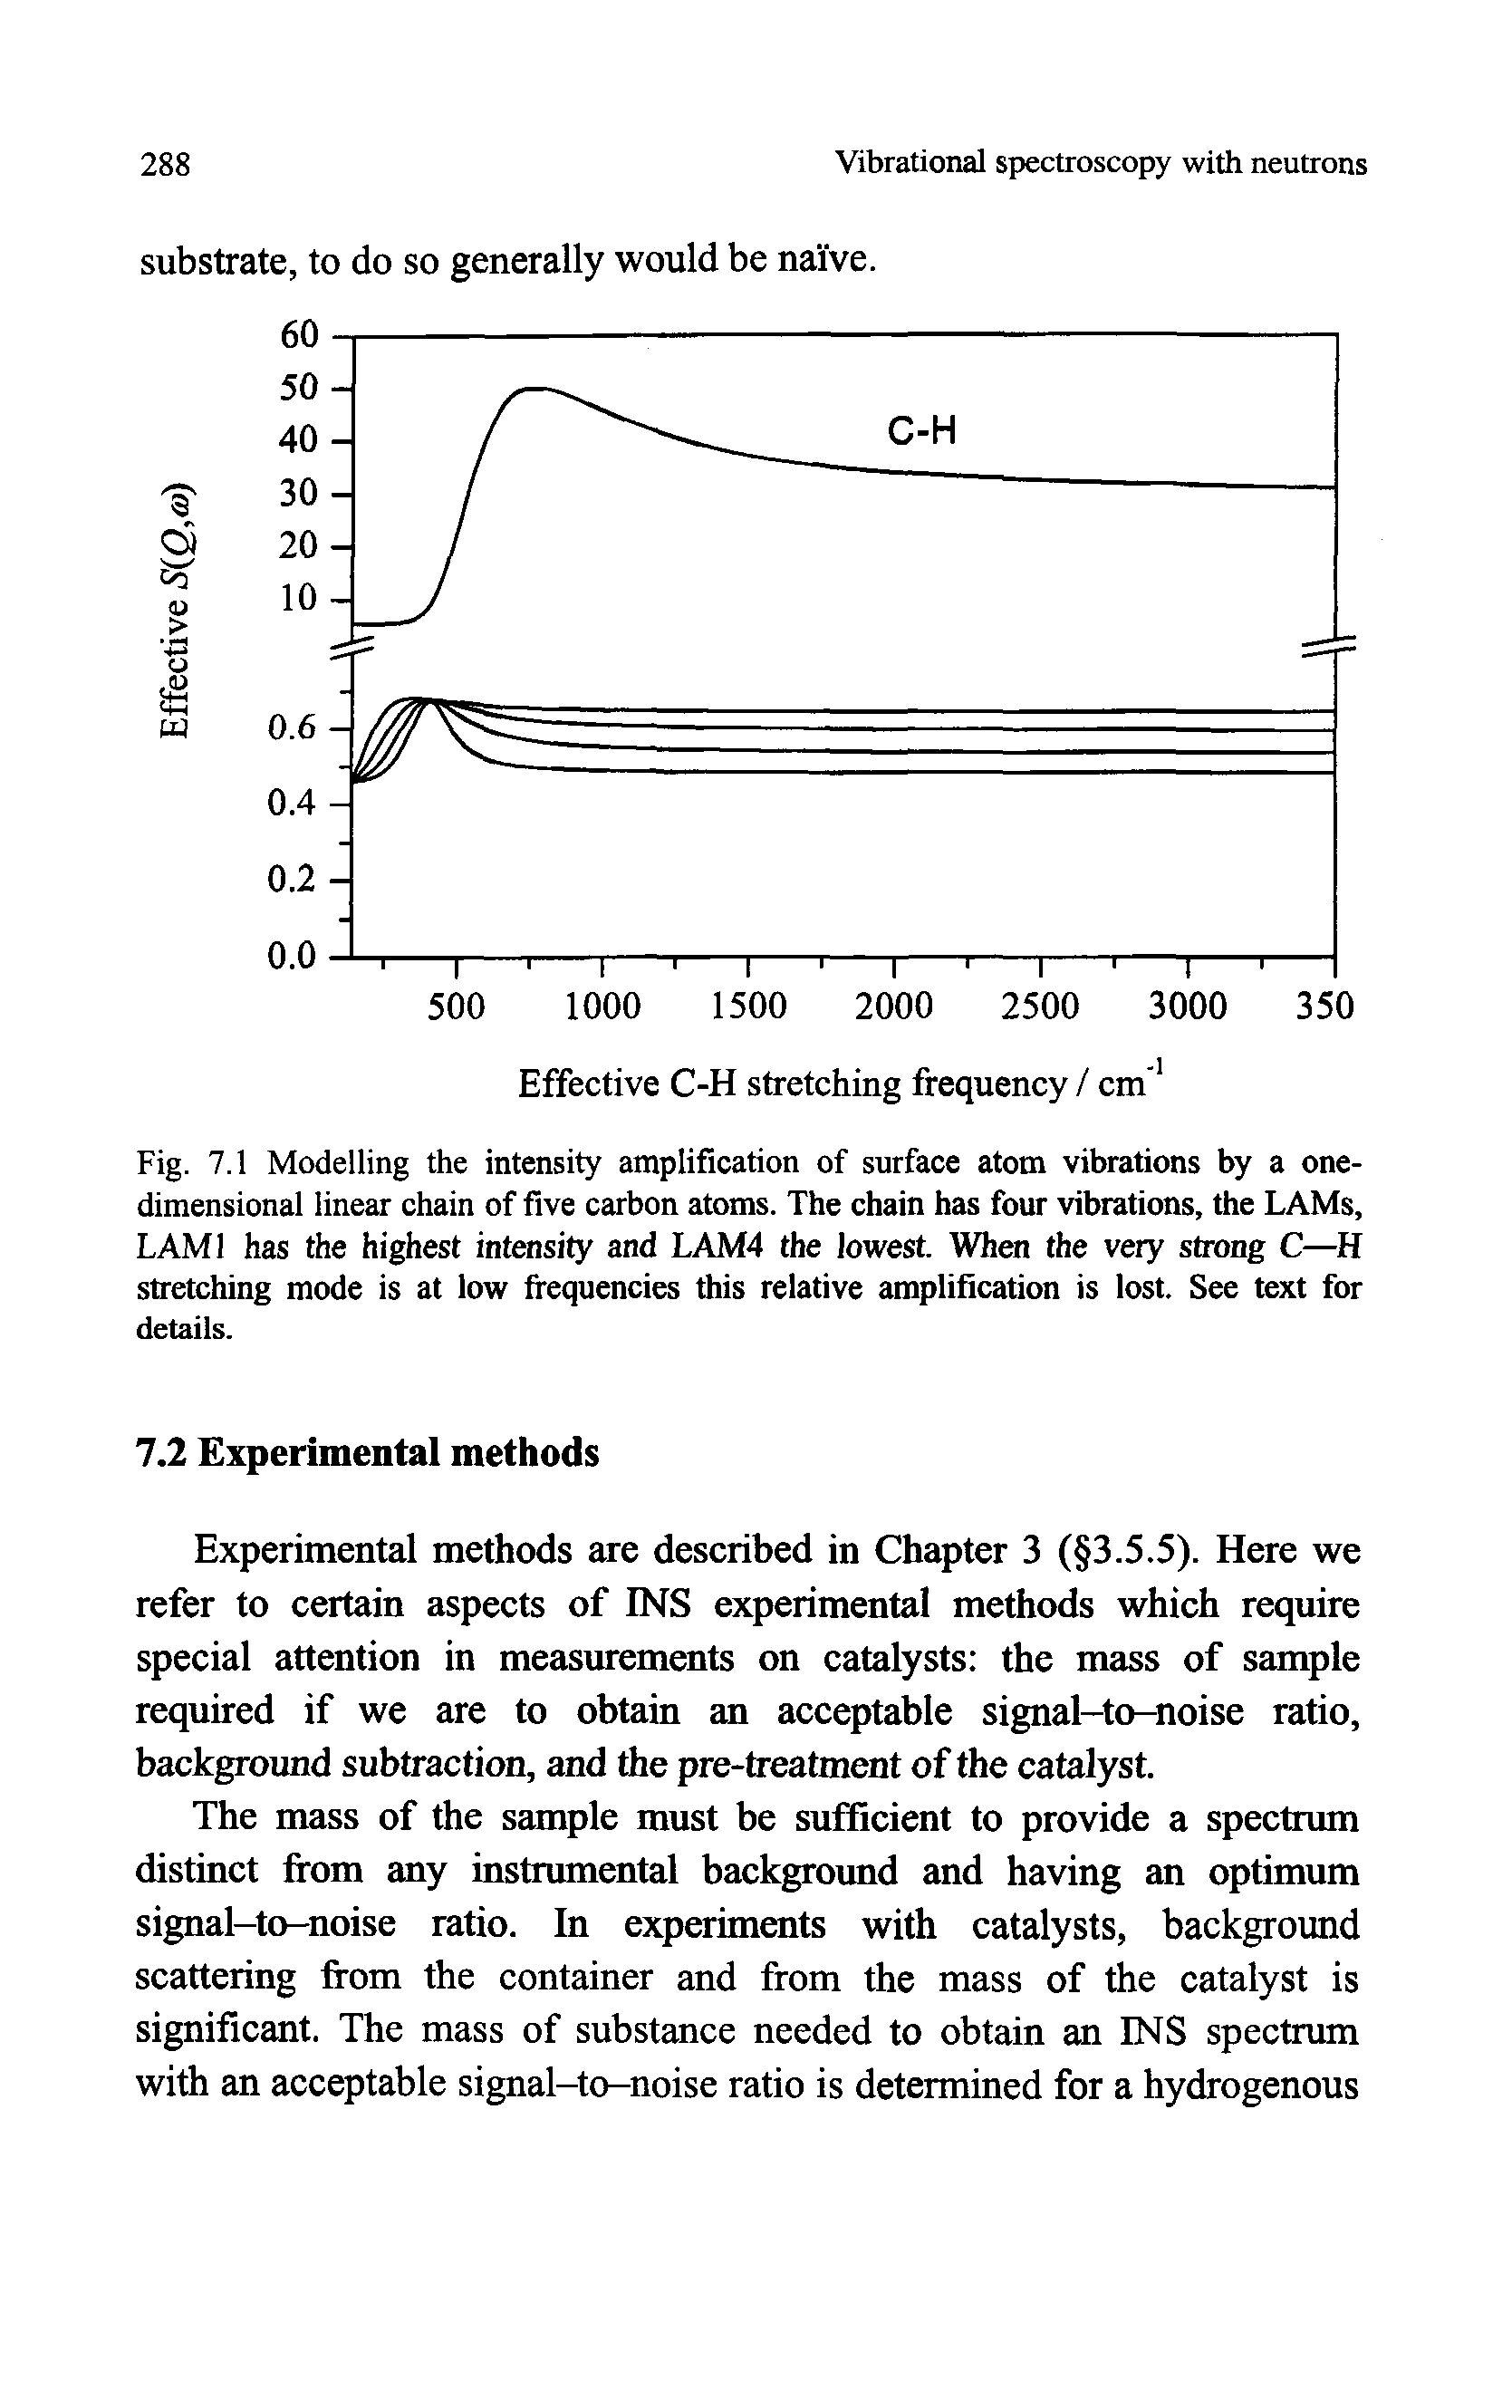 Fig. 7.1 Modelling the intensity amplification of surface atom vibrations by a onedimensional linear chain of five carbon atoms. The chain has four vibrations, the LAMs, LAMl has the highest intensity and LAM4 the lowest. When the very strong C—H stretching mode is at low frequencies this relative amplification is lost. See text for details.